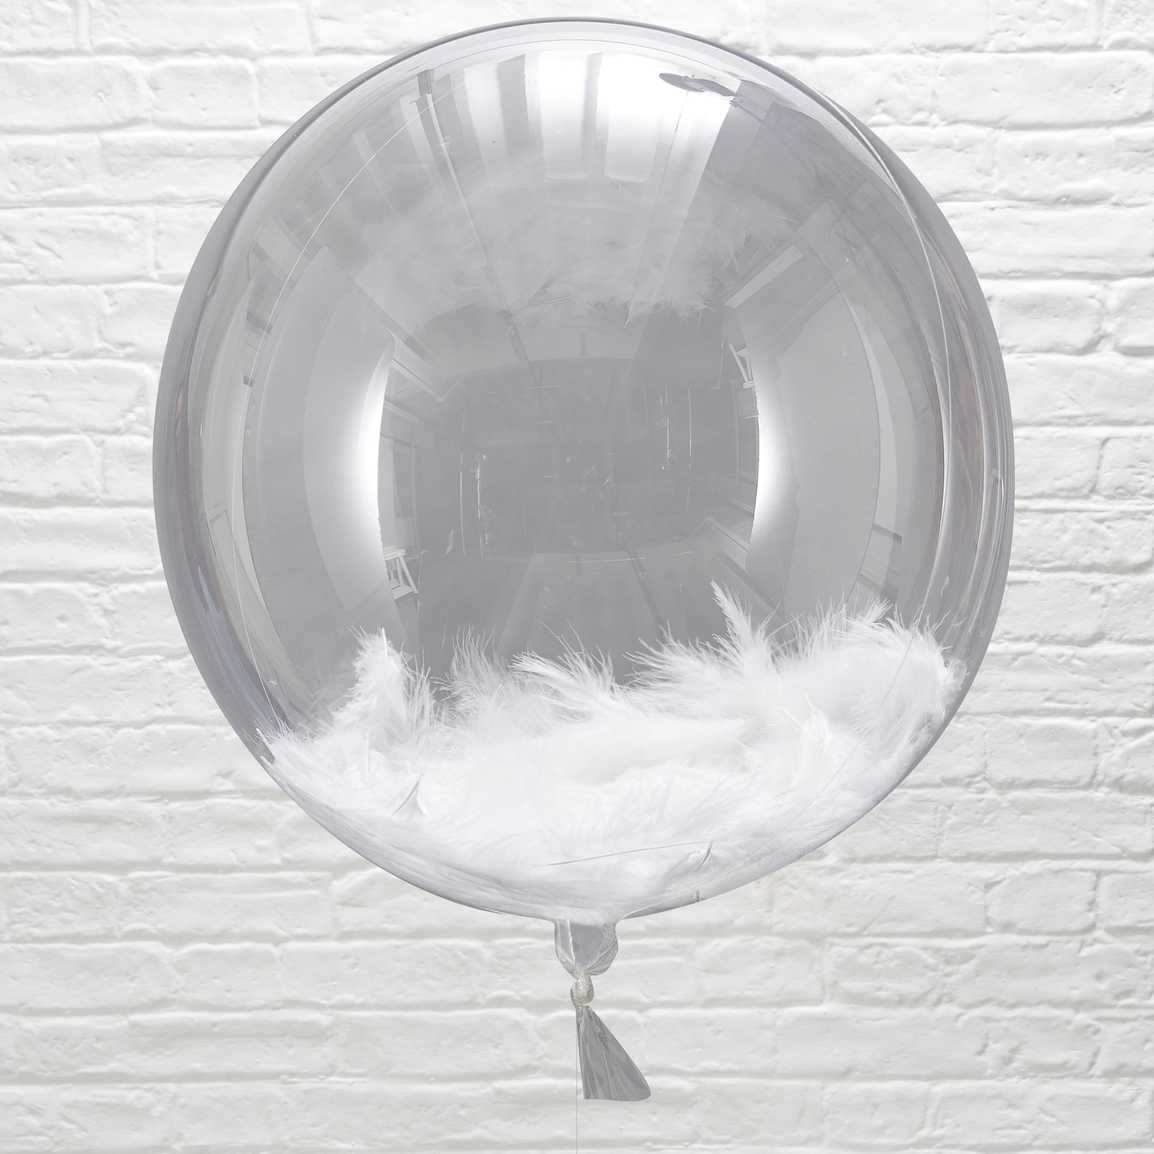 Transparent balloon with white feathers 3 pcs